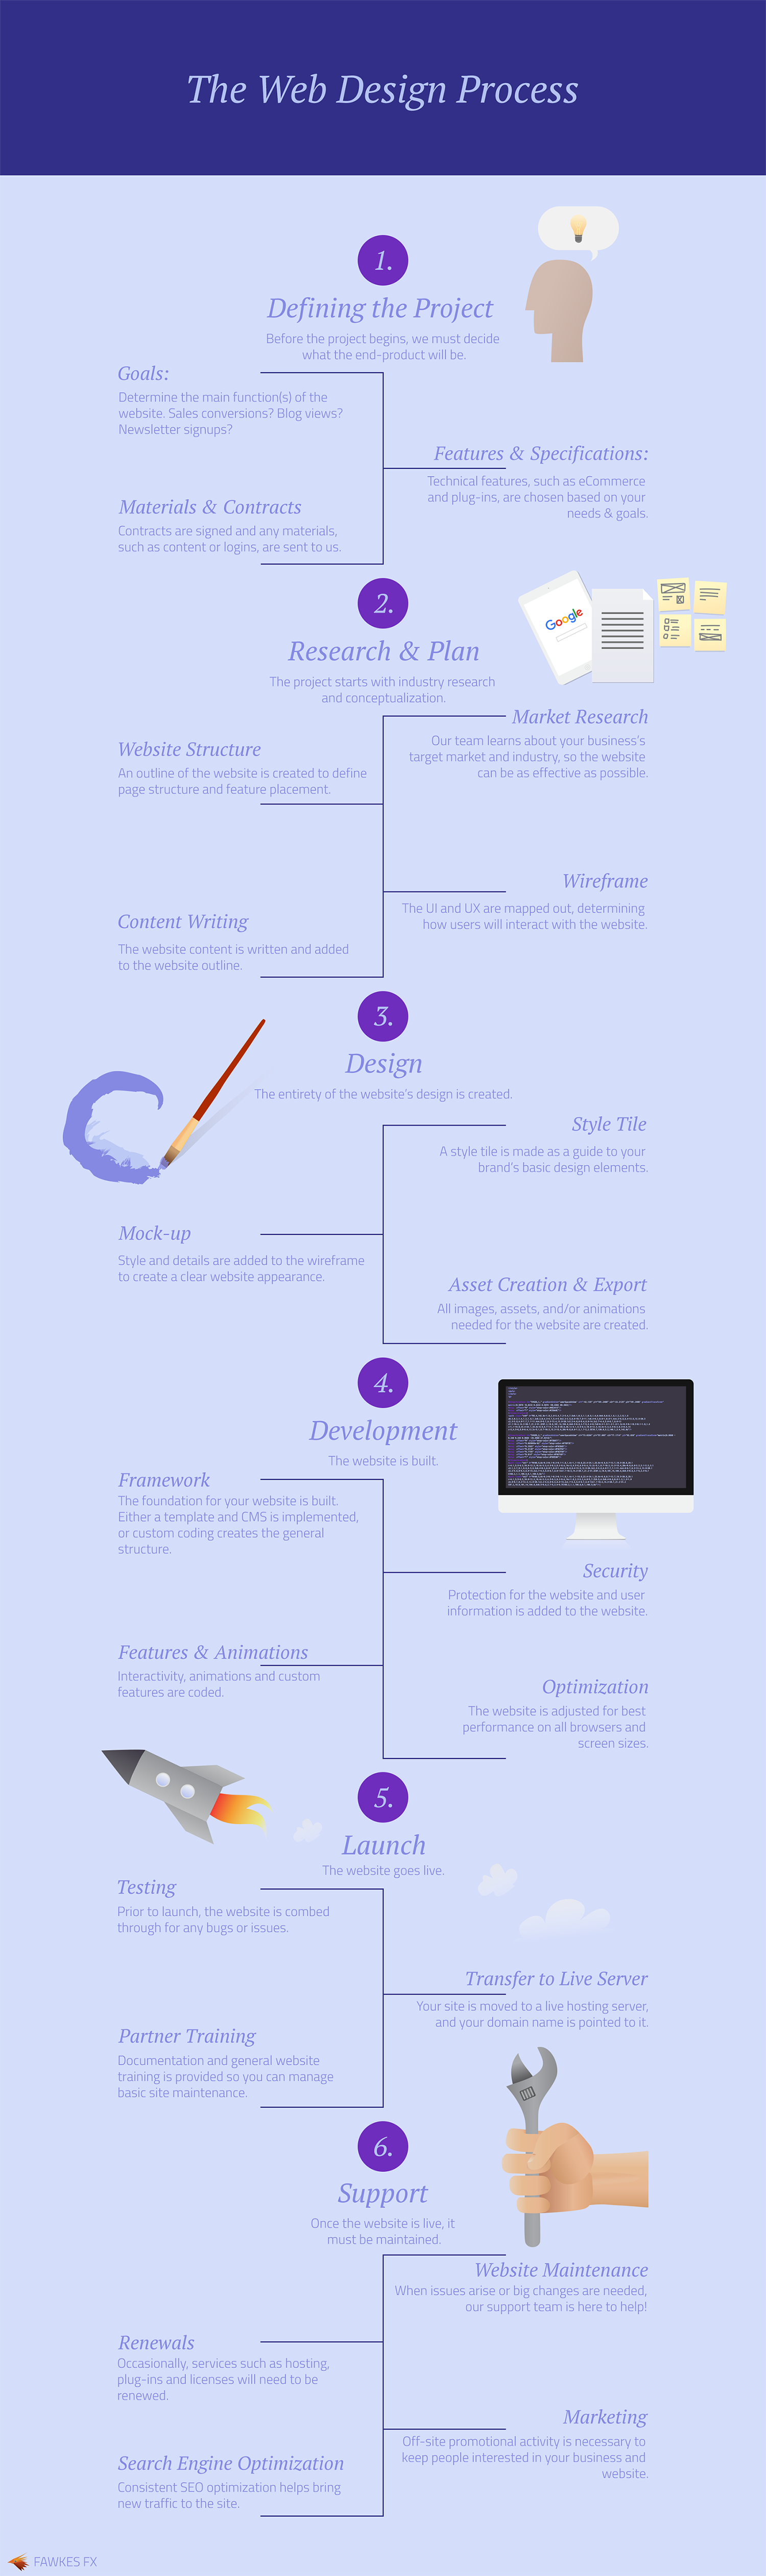 Fawkes FX Web Design Infographic